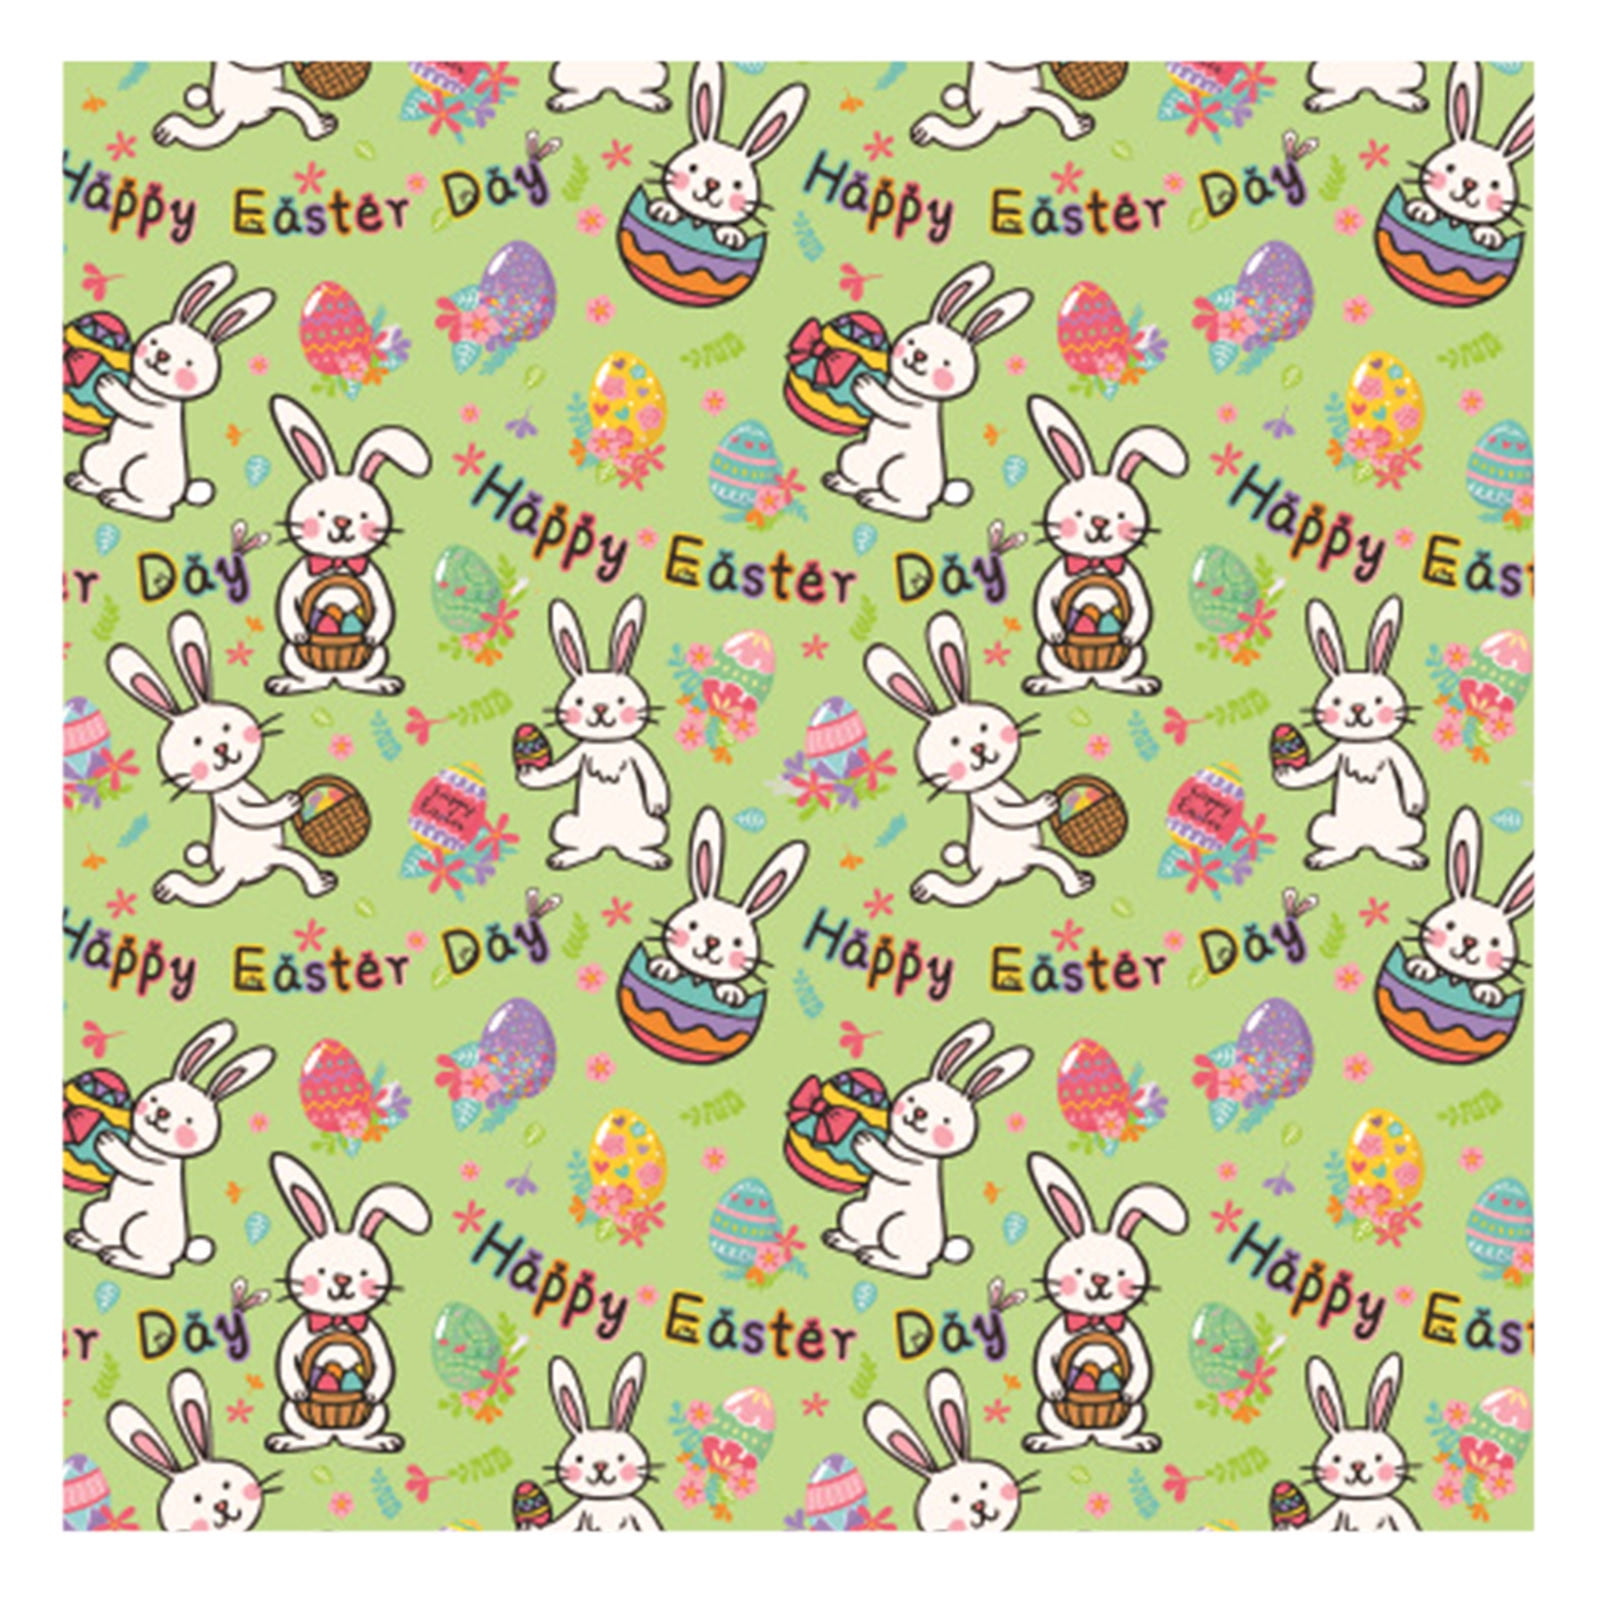 Whaline 12 Sheet Easter Wrapping Paper 6 Design Easter Egg Bunny Rabbit  Colorful Gift Wrapping Paper 27.6×19.7in Cartoon Pastel DIY Craft Art Paper